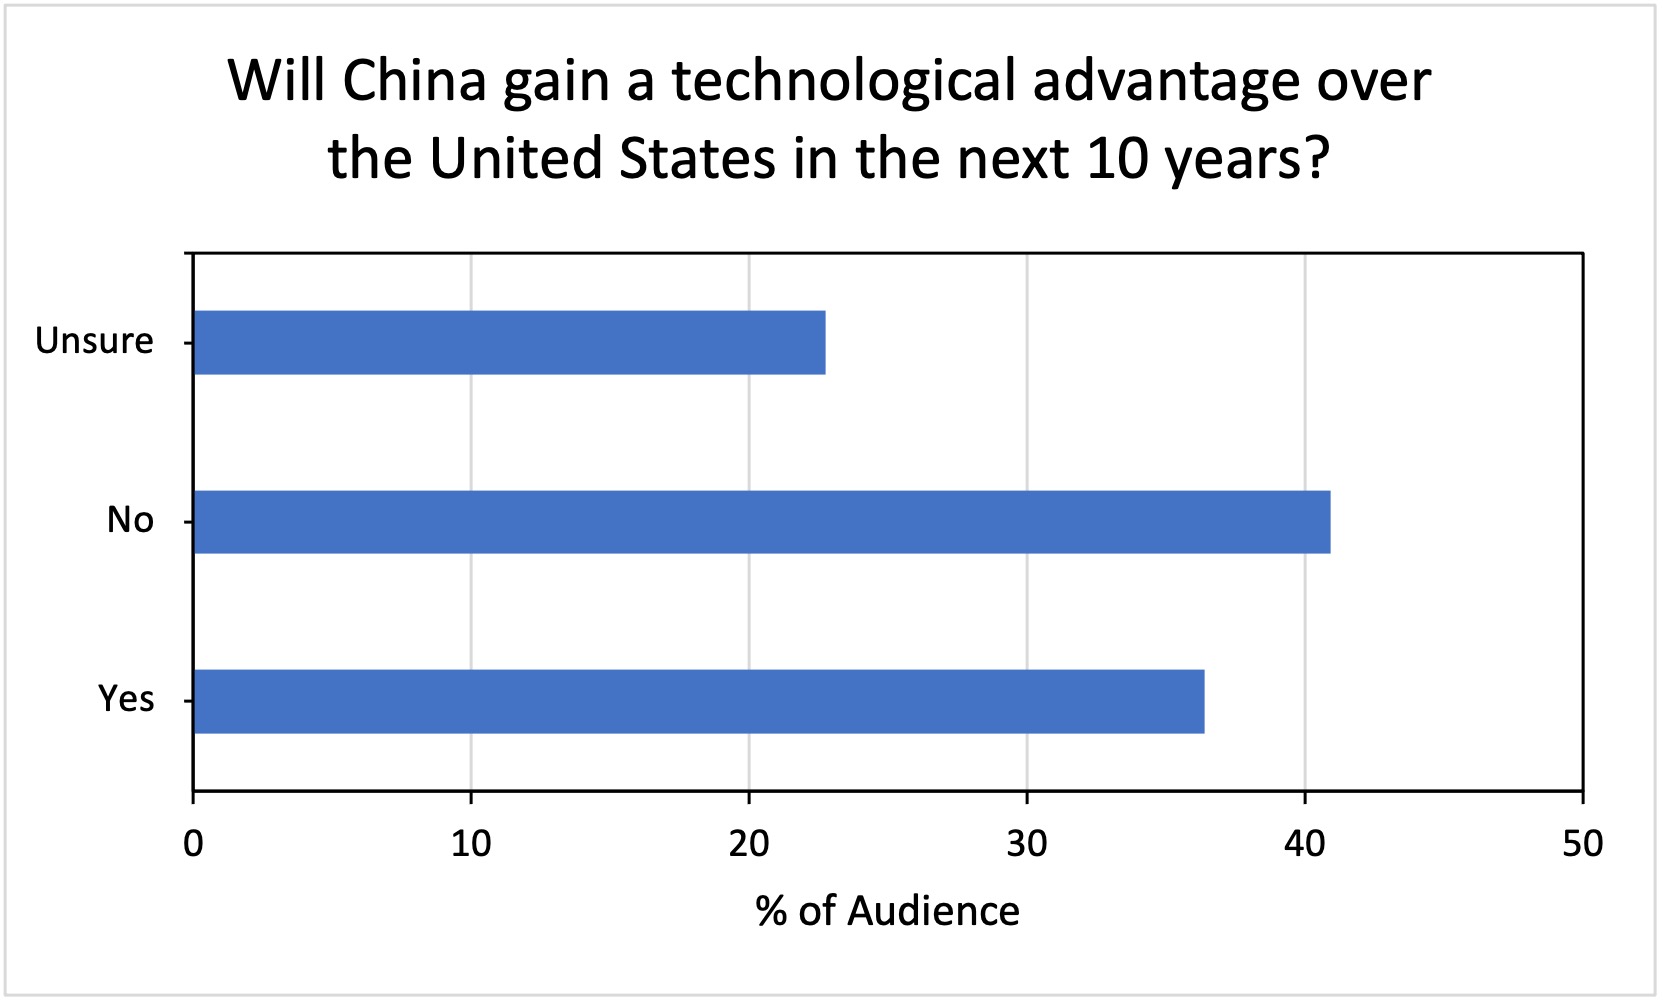 moving-away-fight-or-flight-key-lessons-chinas-tech-regulation - Source: TBI audience poll, September 2022